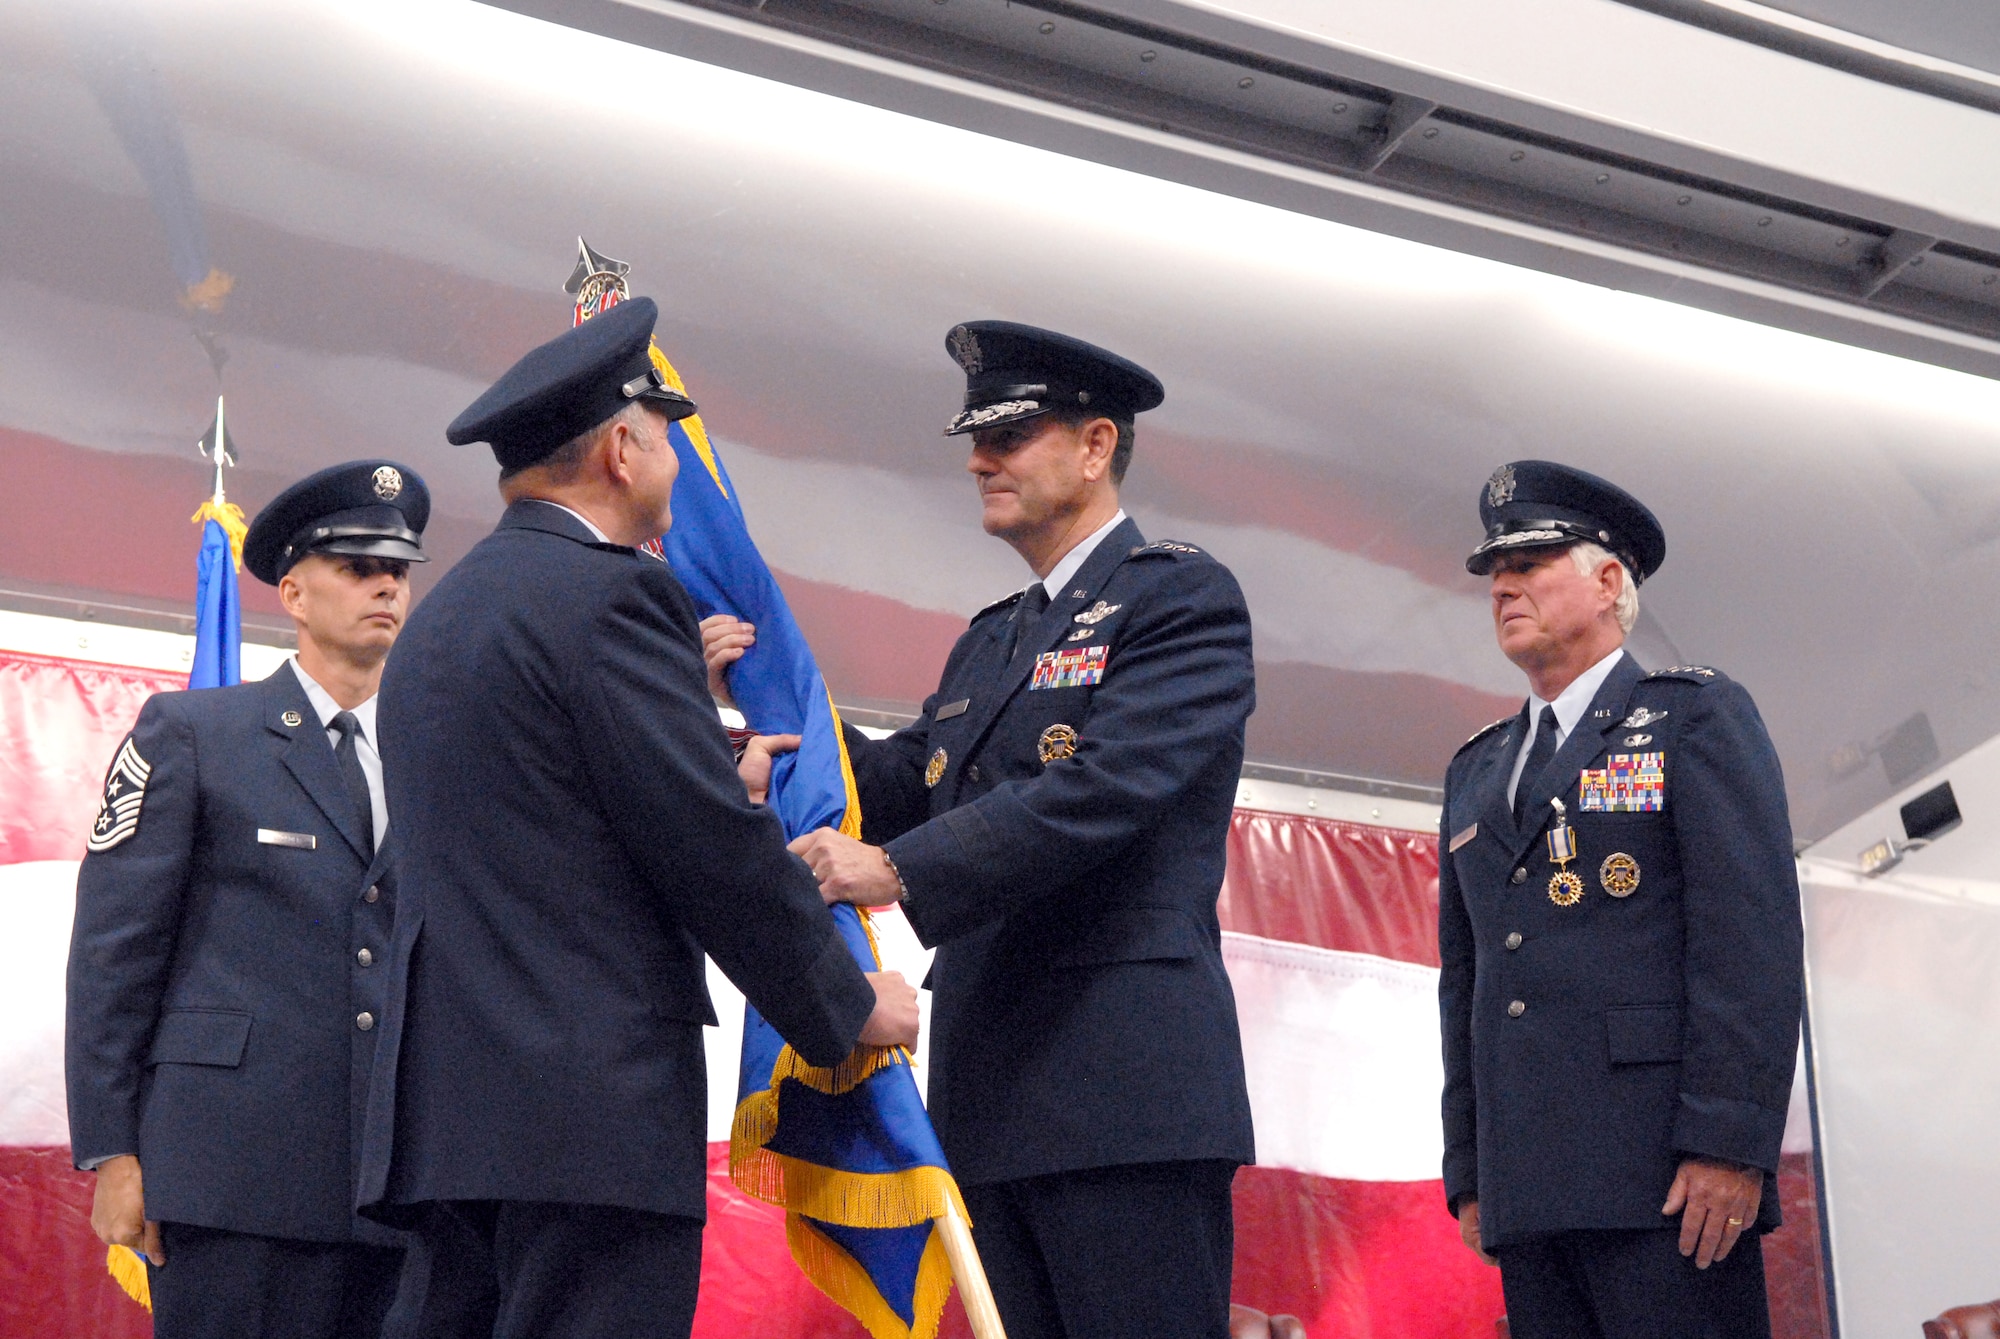 General Stephen Lorenz assumed command of Air Education and Training Command today in a ceremony at Randolph Air Force Base, Texas.  He replaces Gen. William R. Looney III, who retired during the ceremony. (U.S. Air Force photo/Rich McFadden)